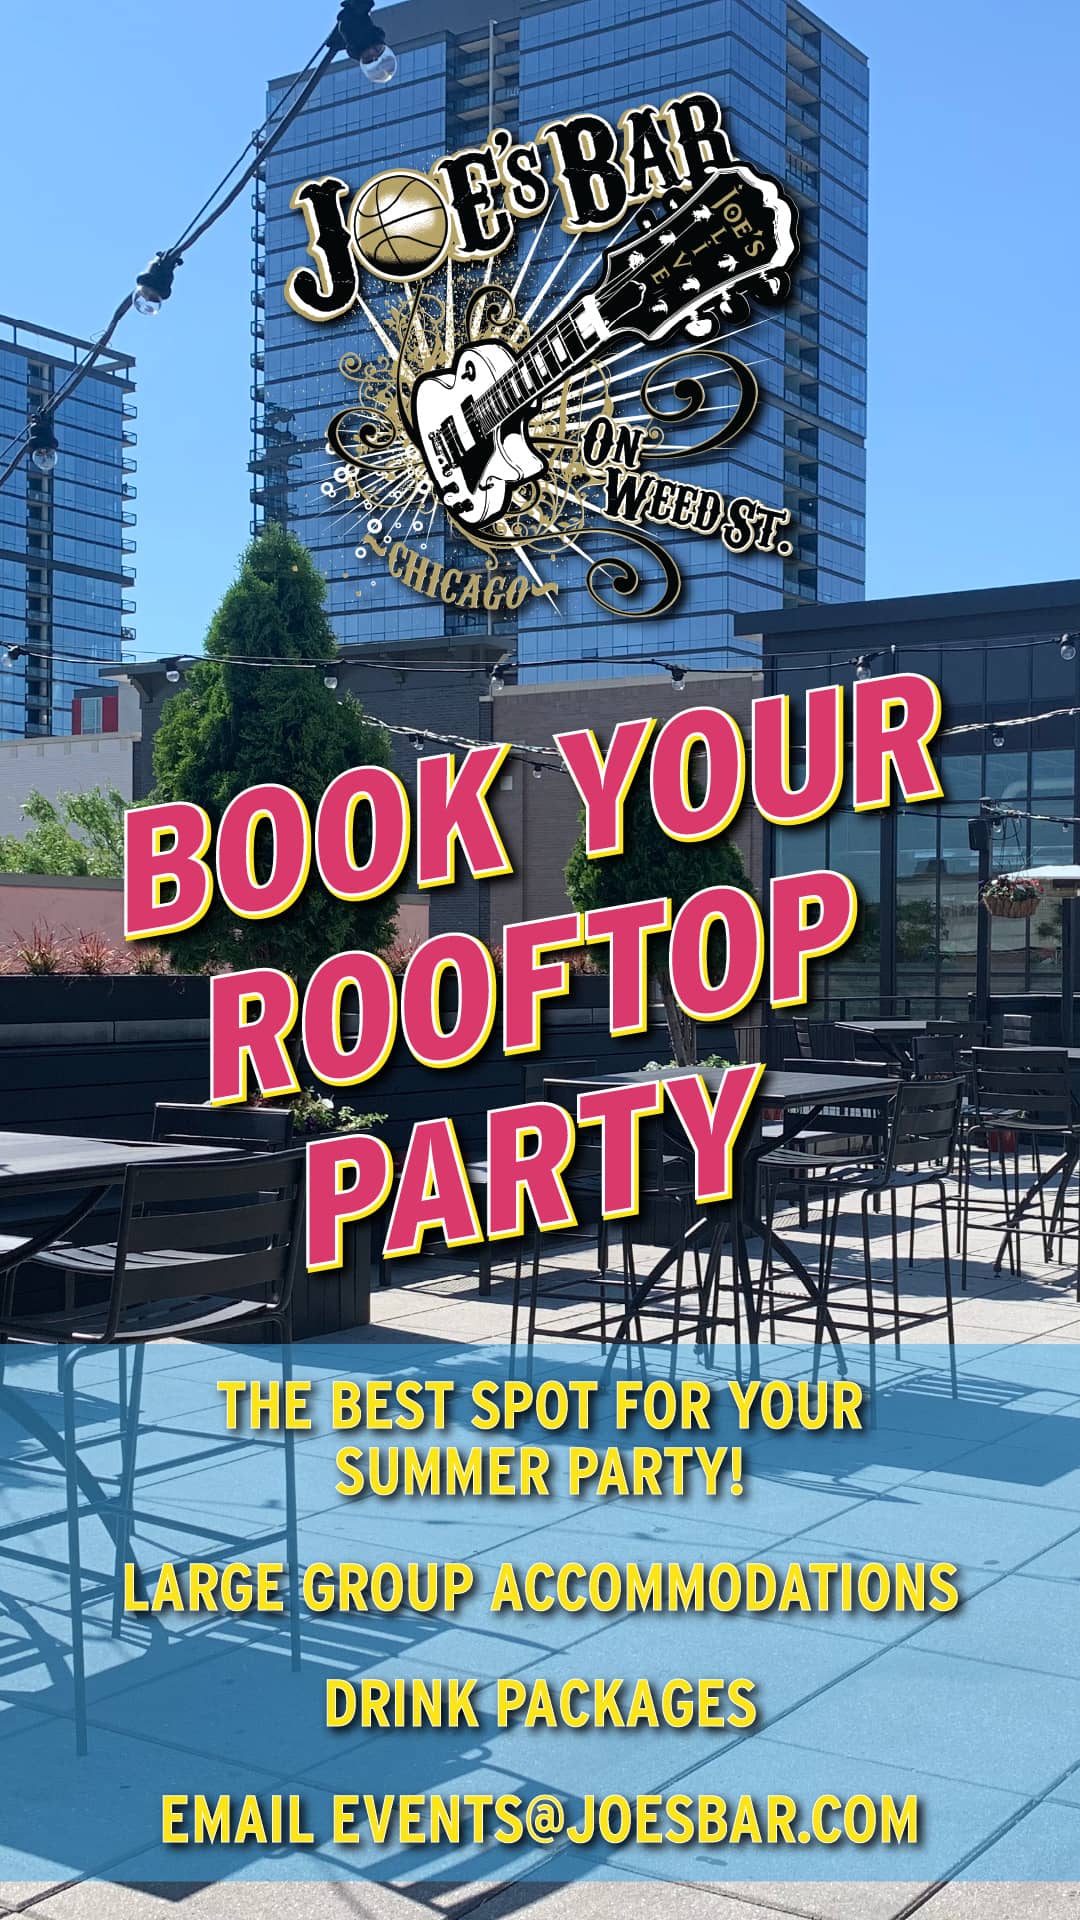 Poster to book a rooftop party at Joe's on Weed St.